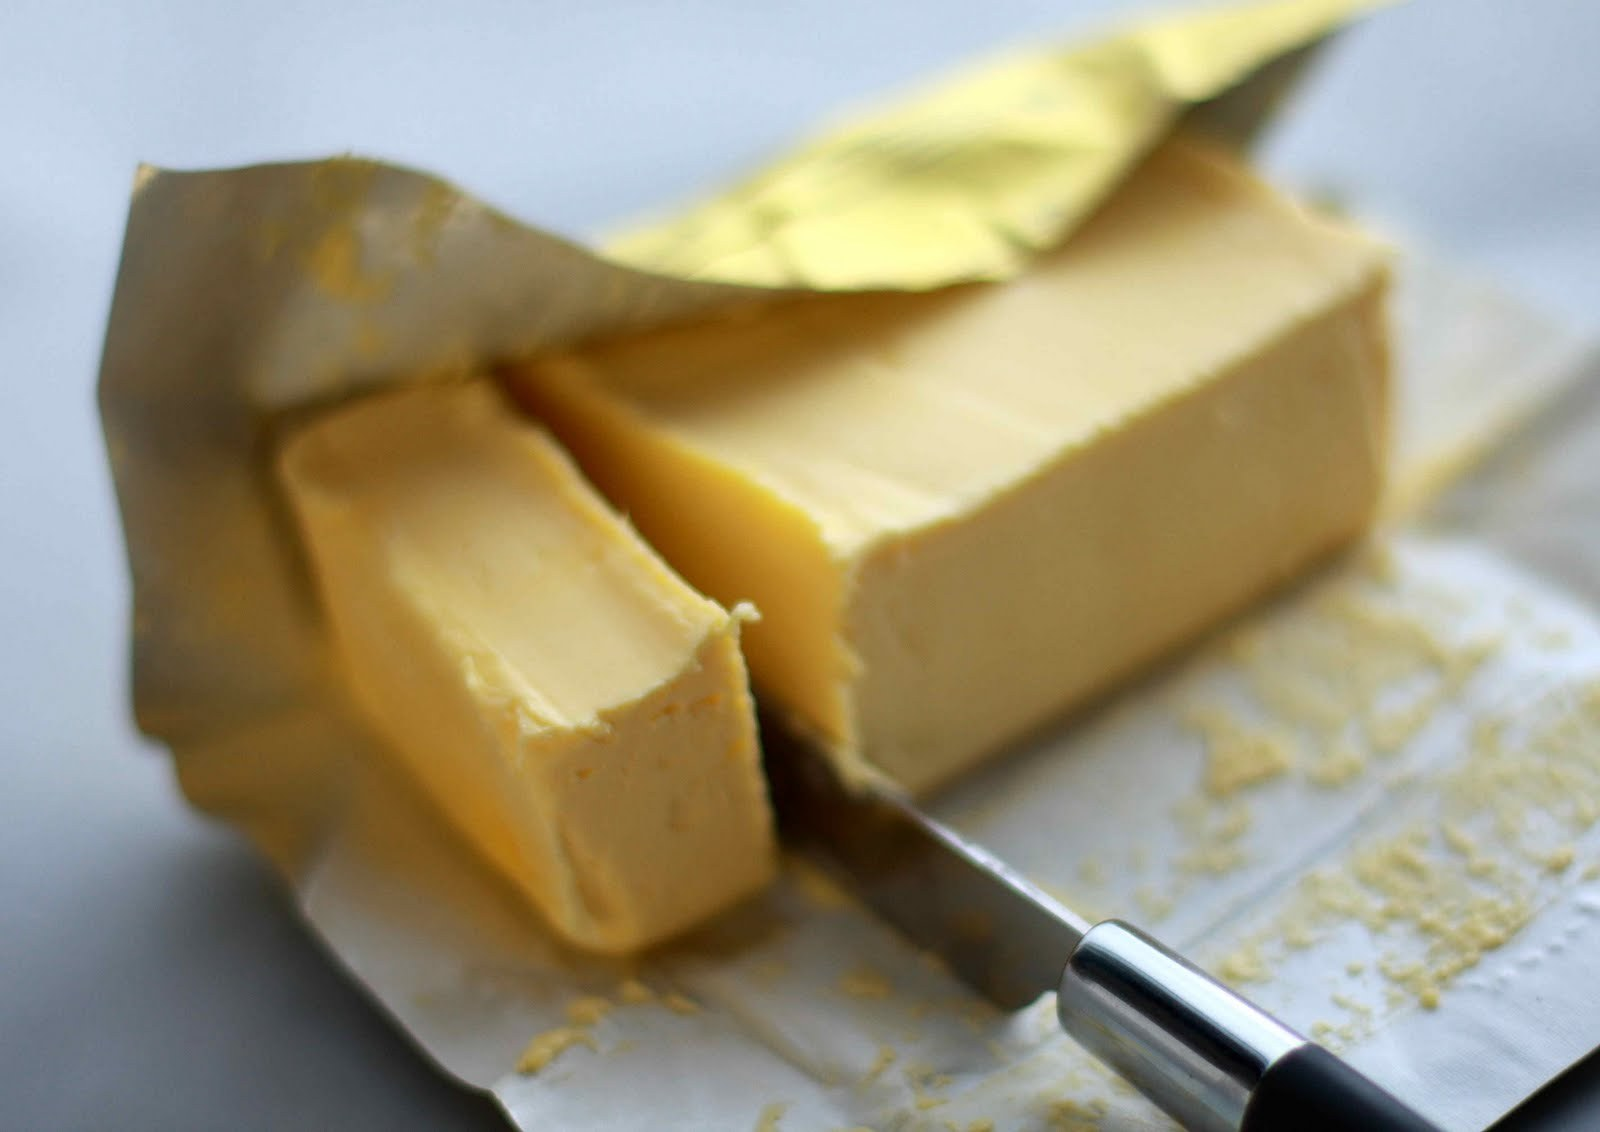 Wisconsin: Butter substitutes are not allowed to be served in state prisons.